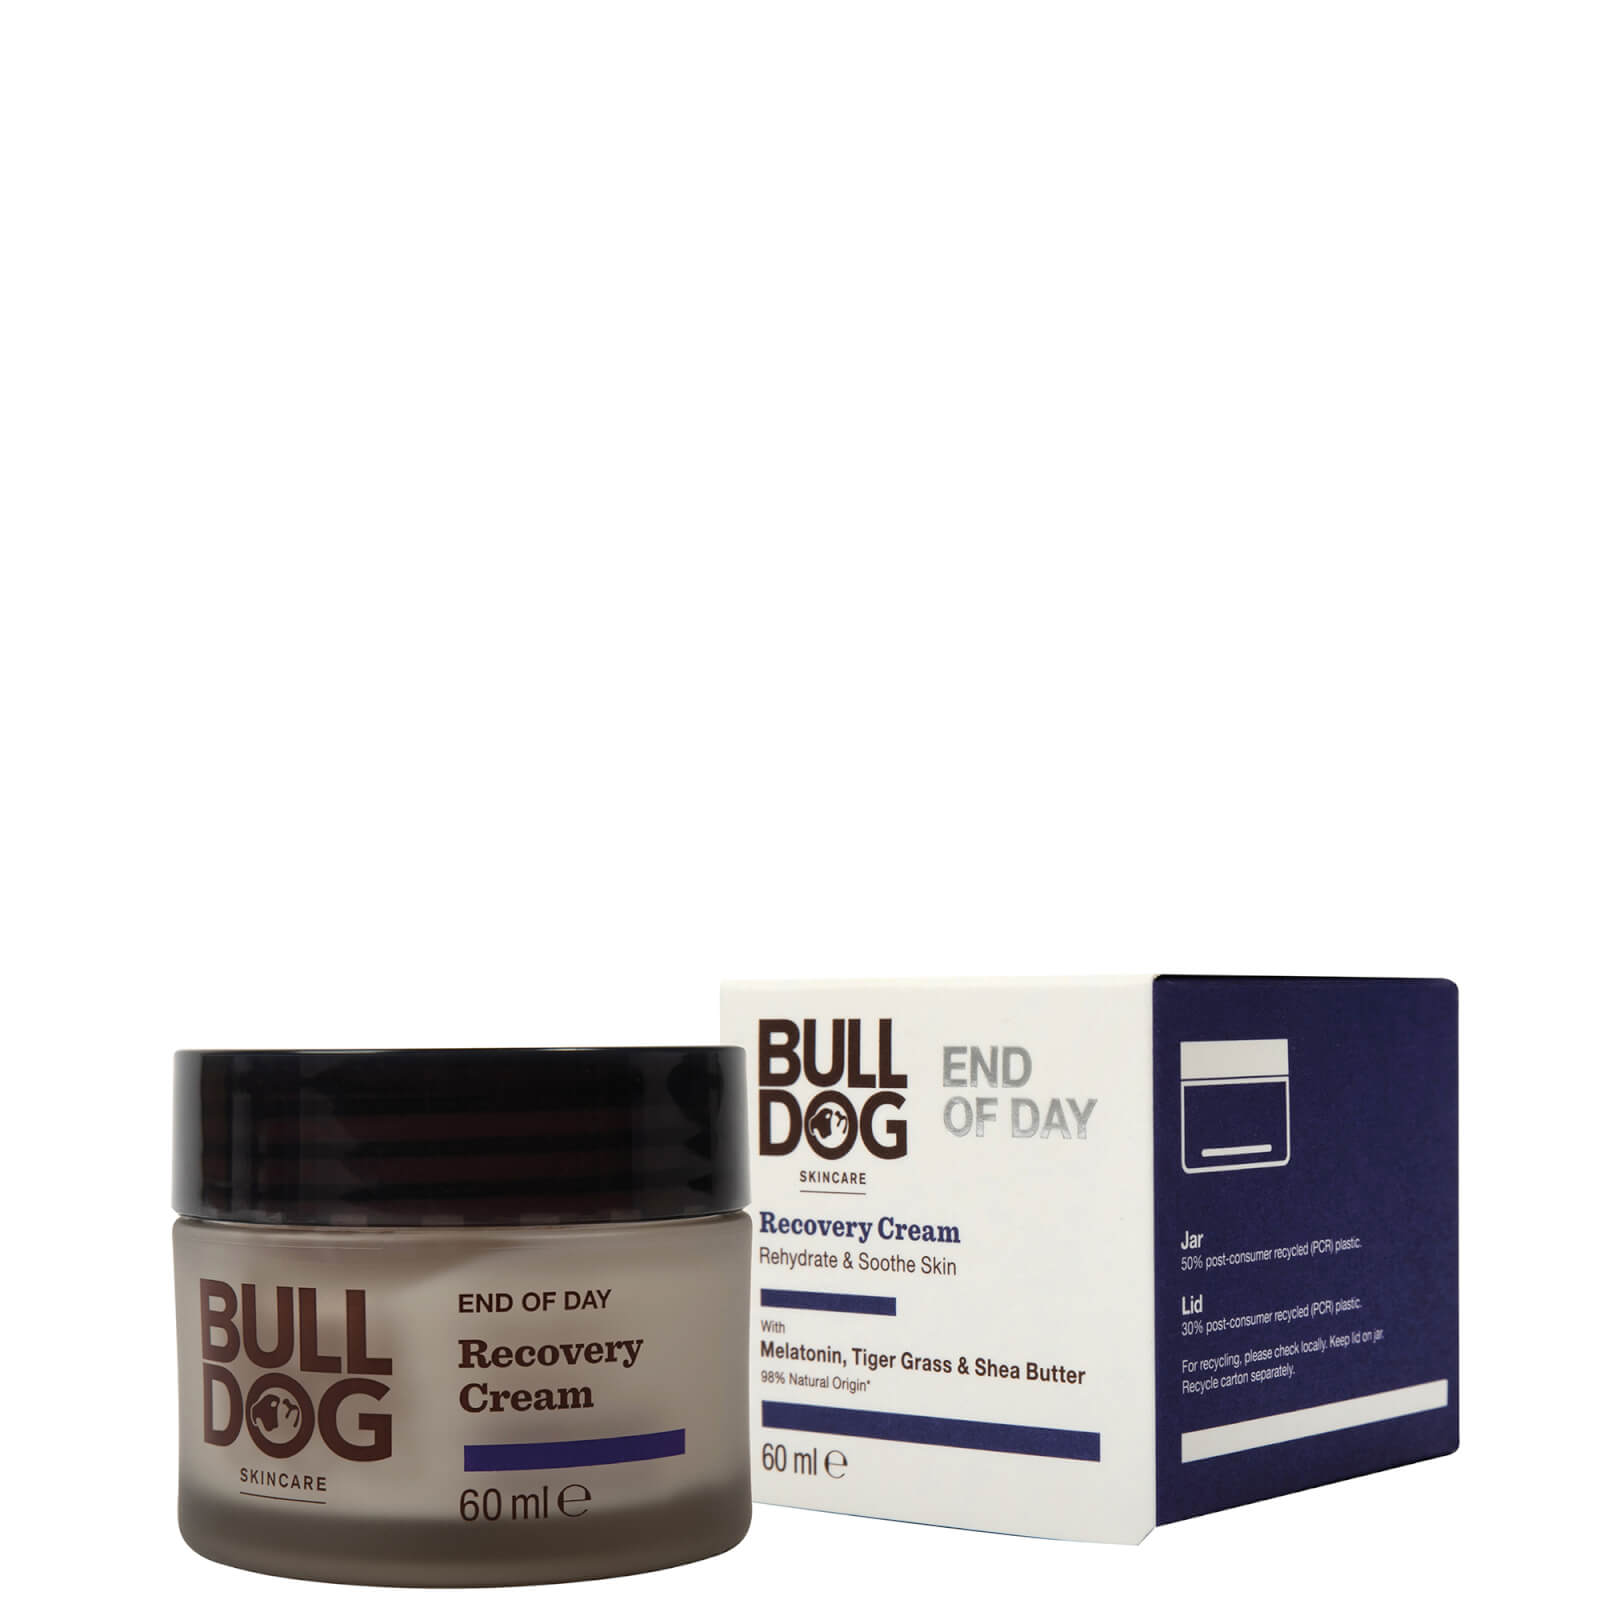 Image of Bulldog End of Day Recovery Cream 60ml